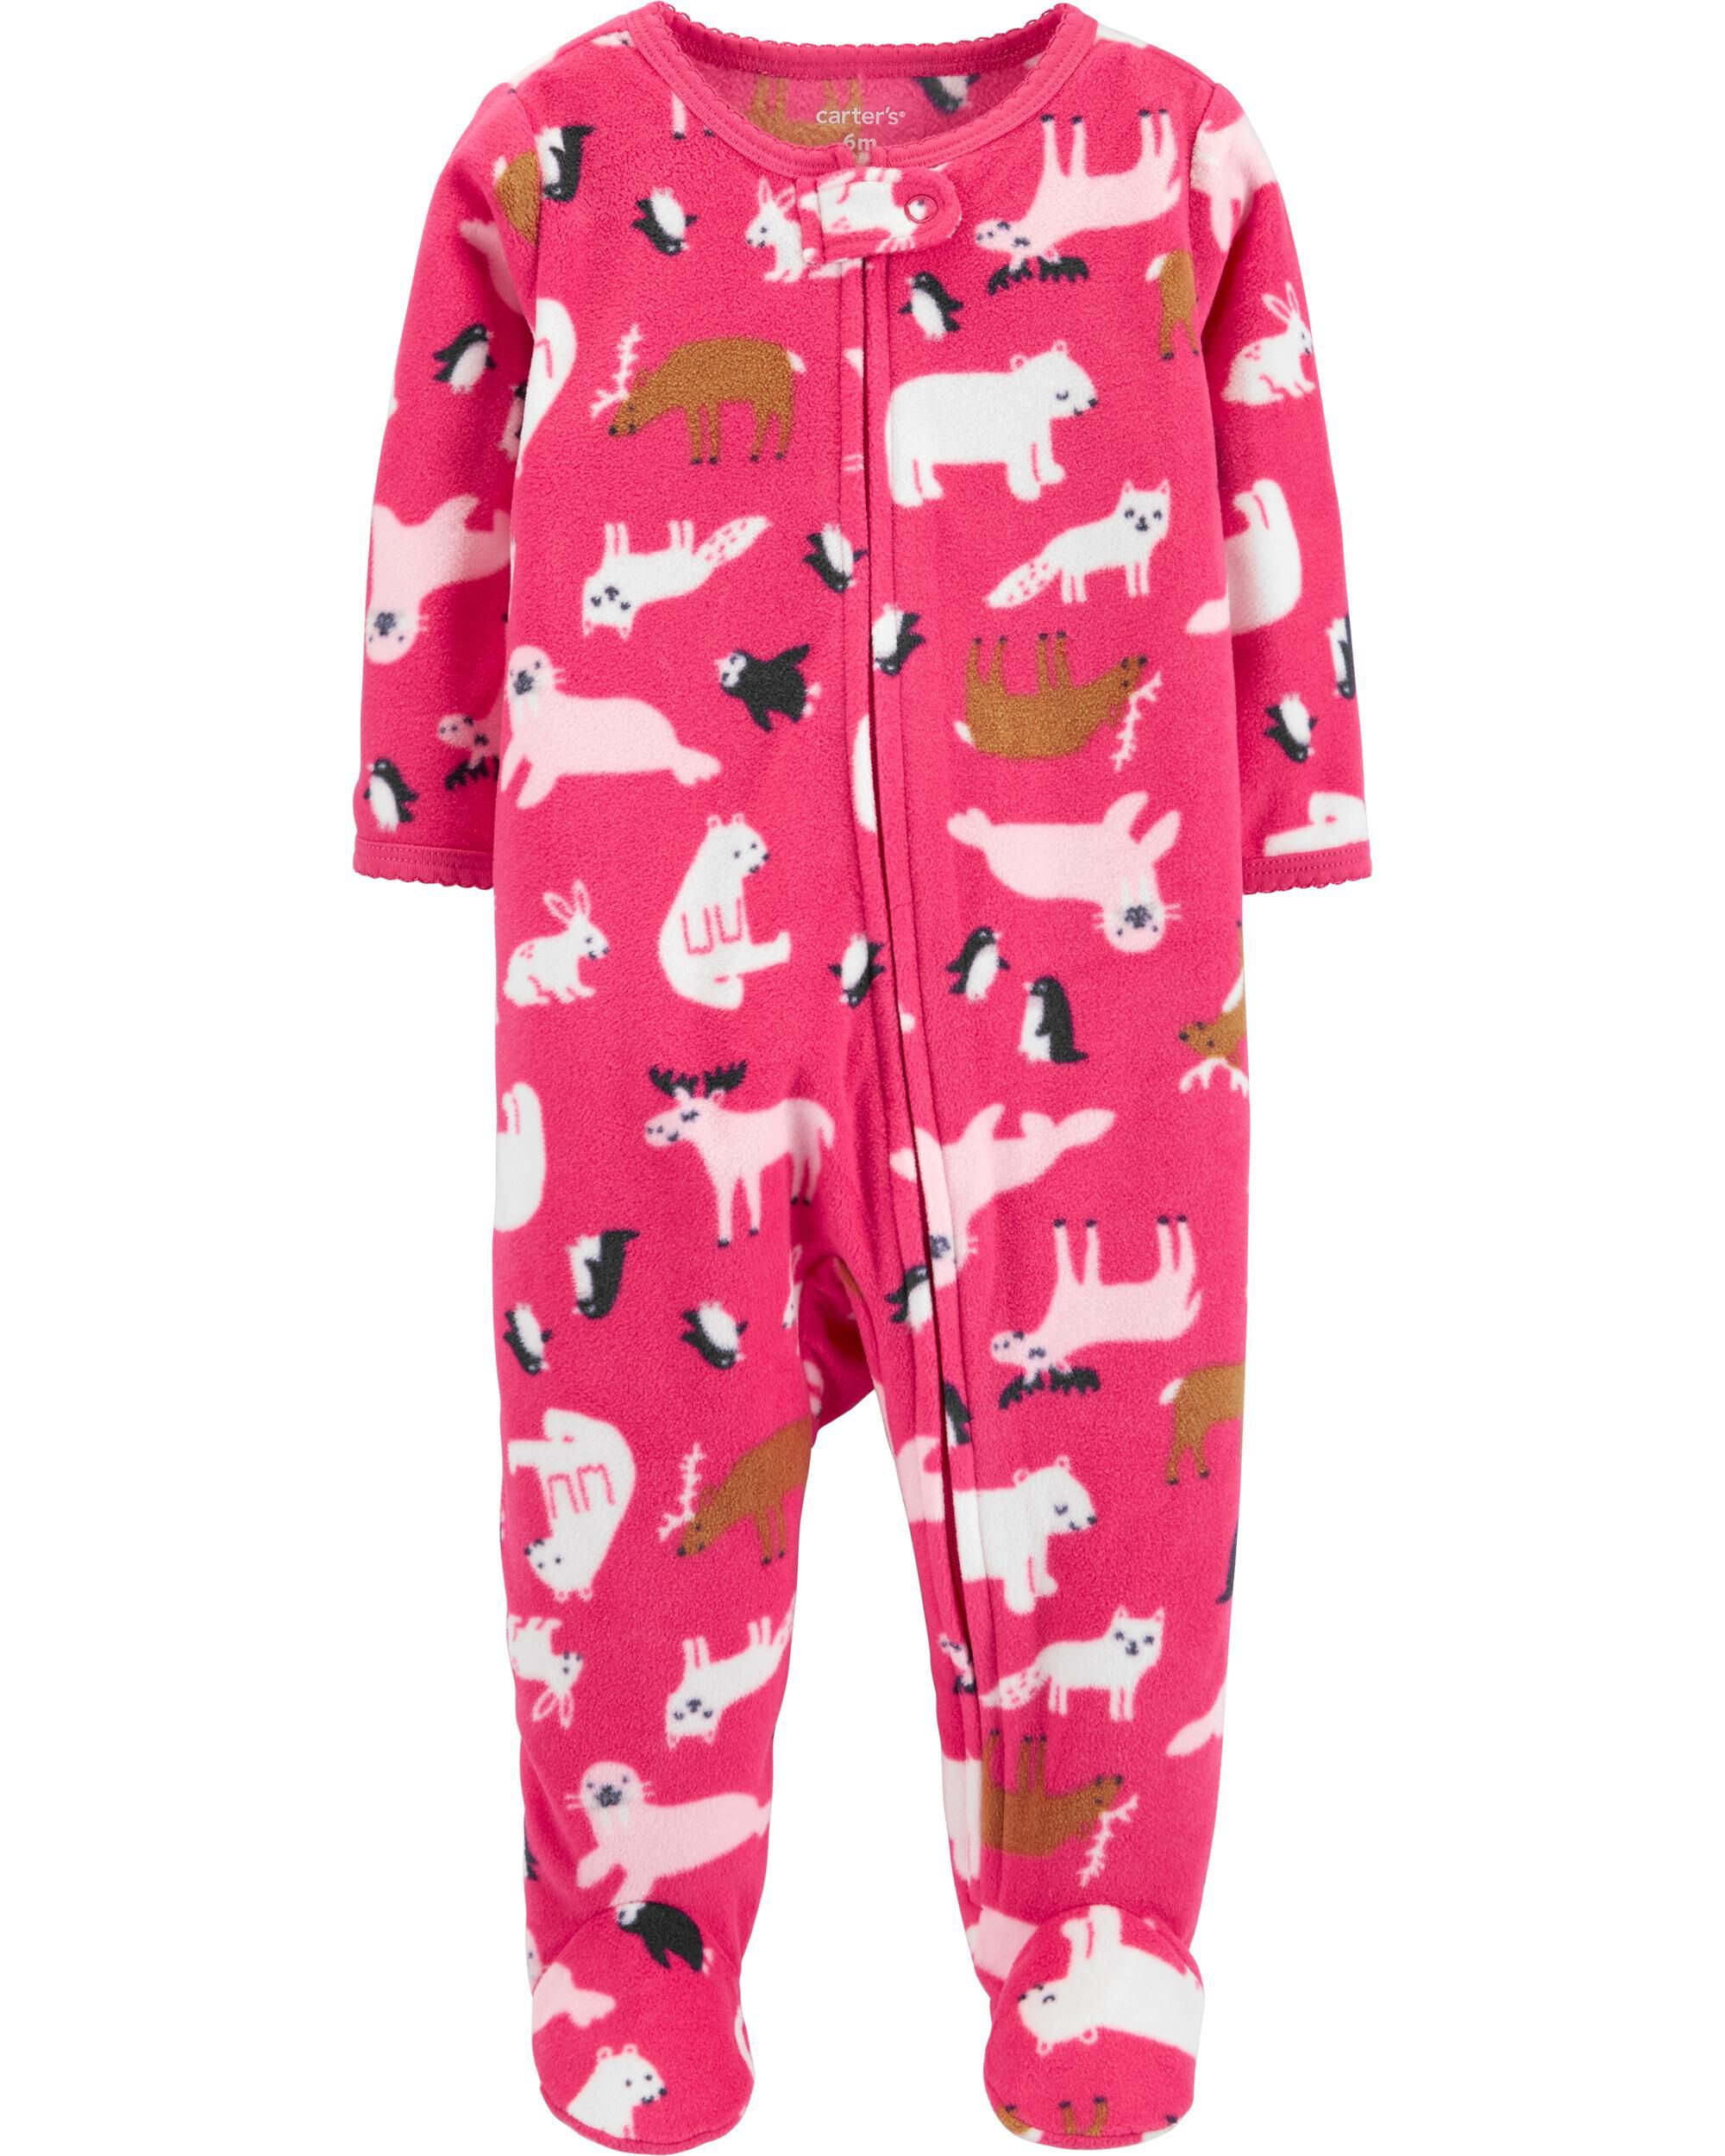 Buffalo Check Heart//Animals Carters Baby Girls 2-Pack Fleece Footed Sleep and Play 6 Months